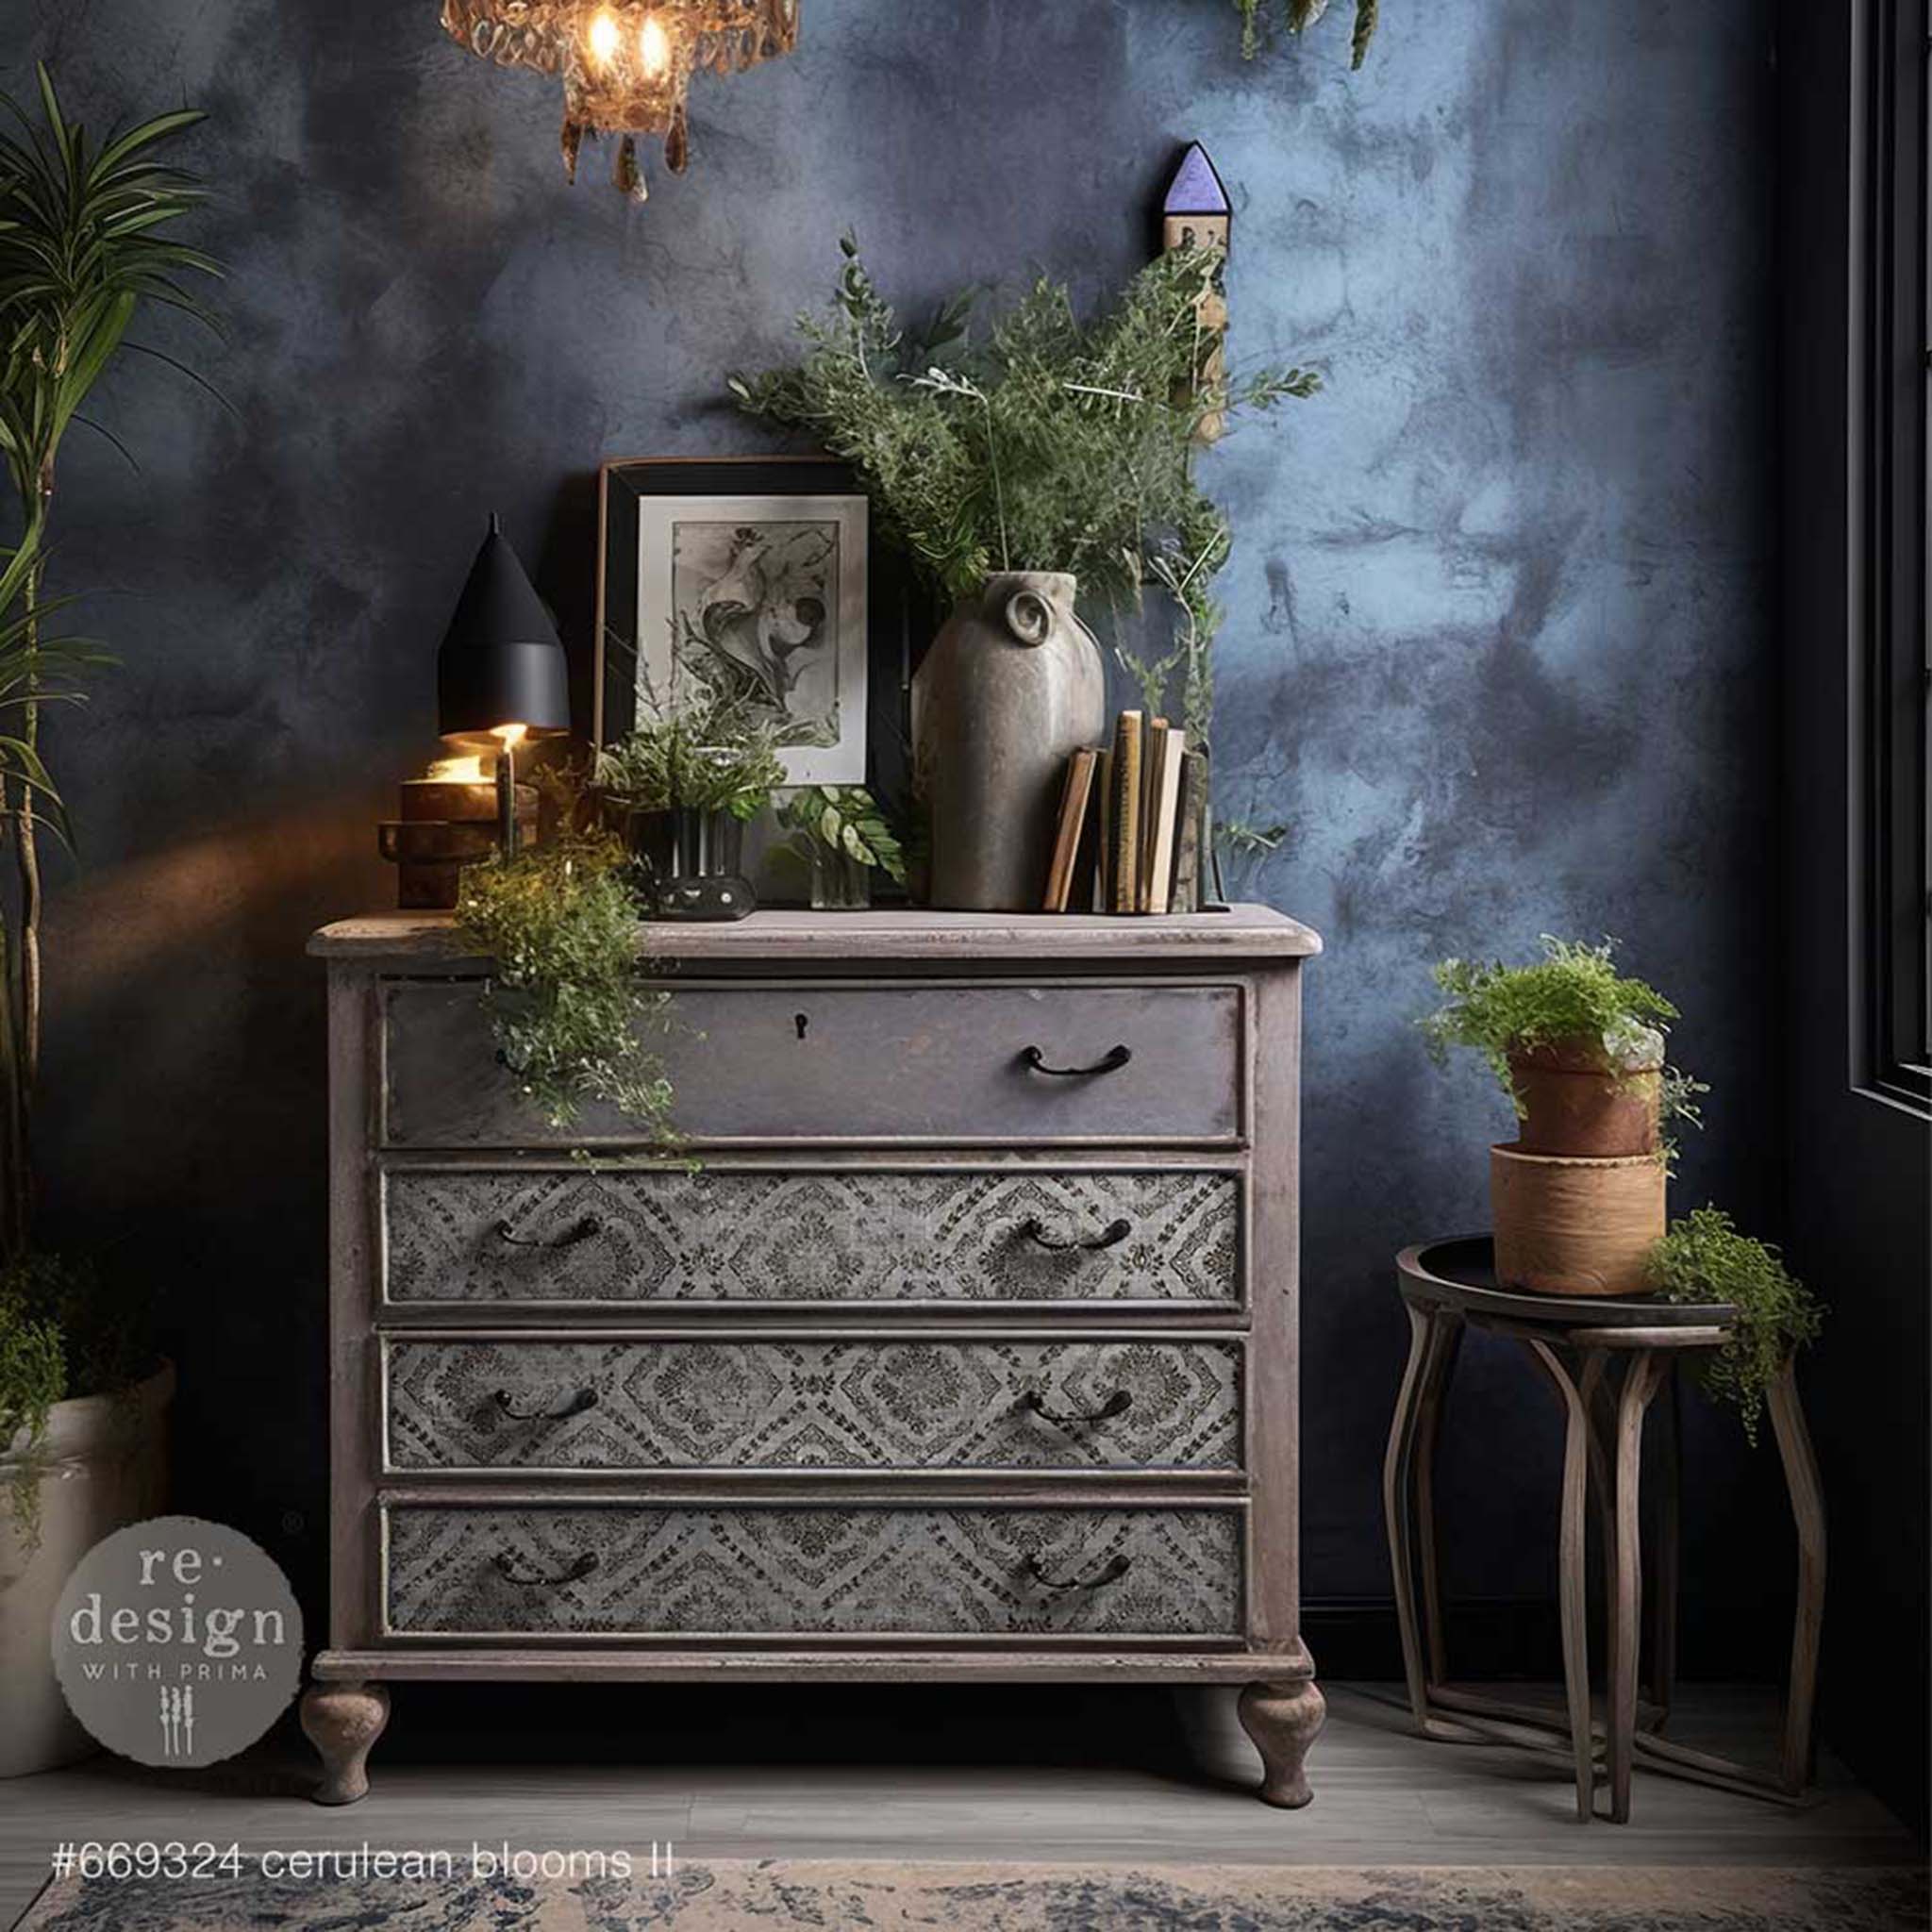 A vintage 4-drawer dresser is painted grey and features ReDesign with Prima's Cerulean Blooms 2 on its bottom 3 drawers.